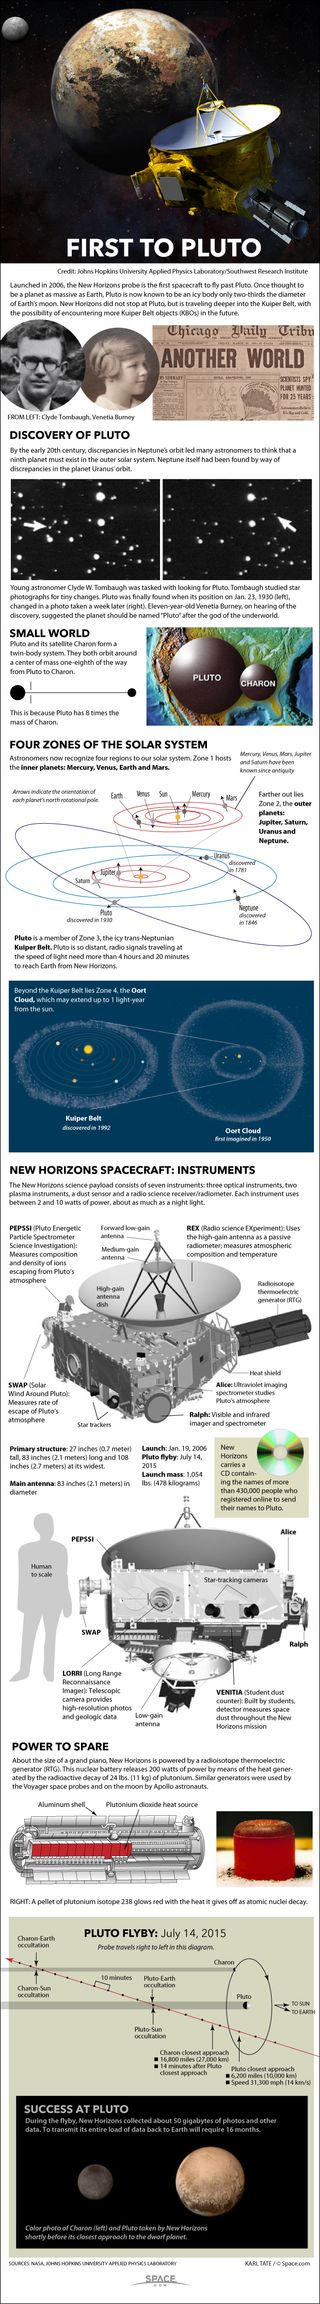 New Horizons becomes the first probe to explore Pluto in mid-2015. See how the New Horizons mission to Pluto works in our full infographic here.